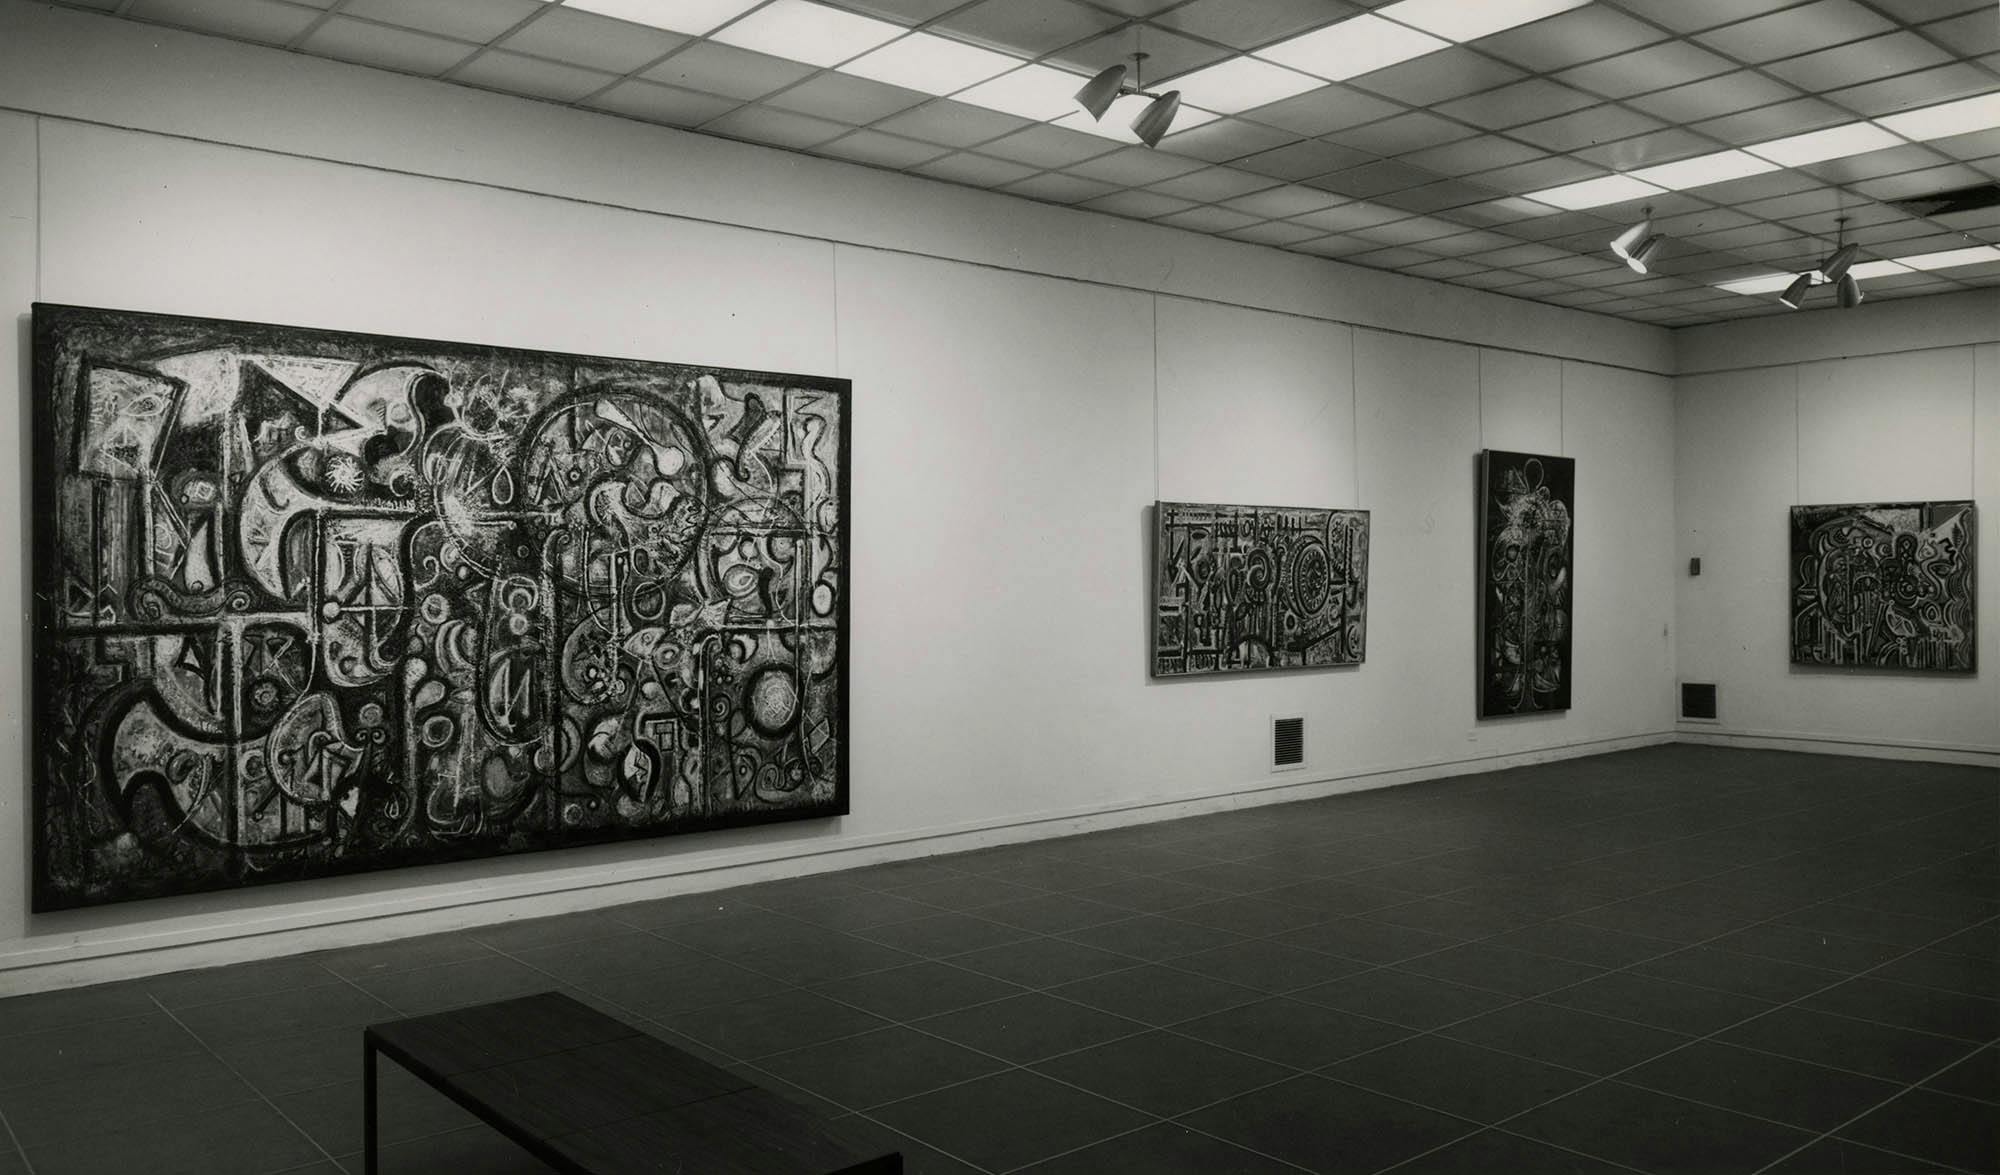 Installation view, Richard Pousette-Dart, Whitney Museum of American Art, New York, NY, 1963.